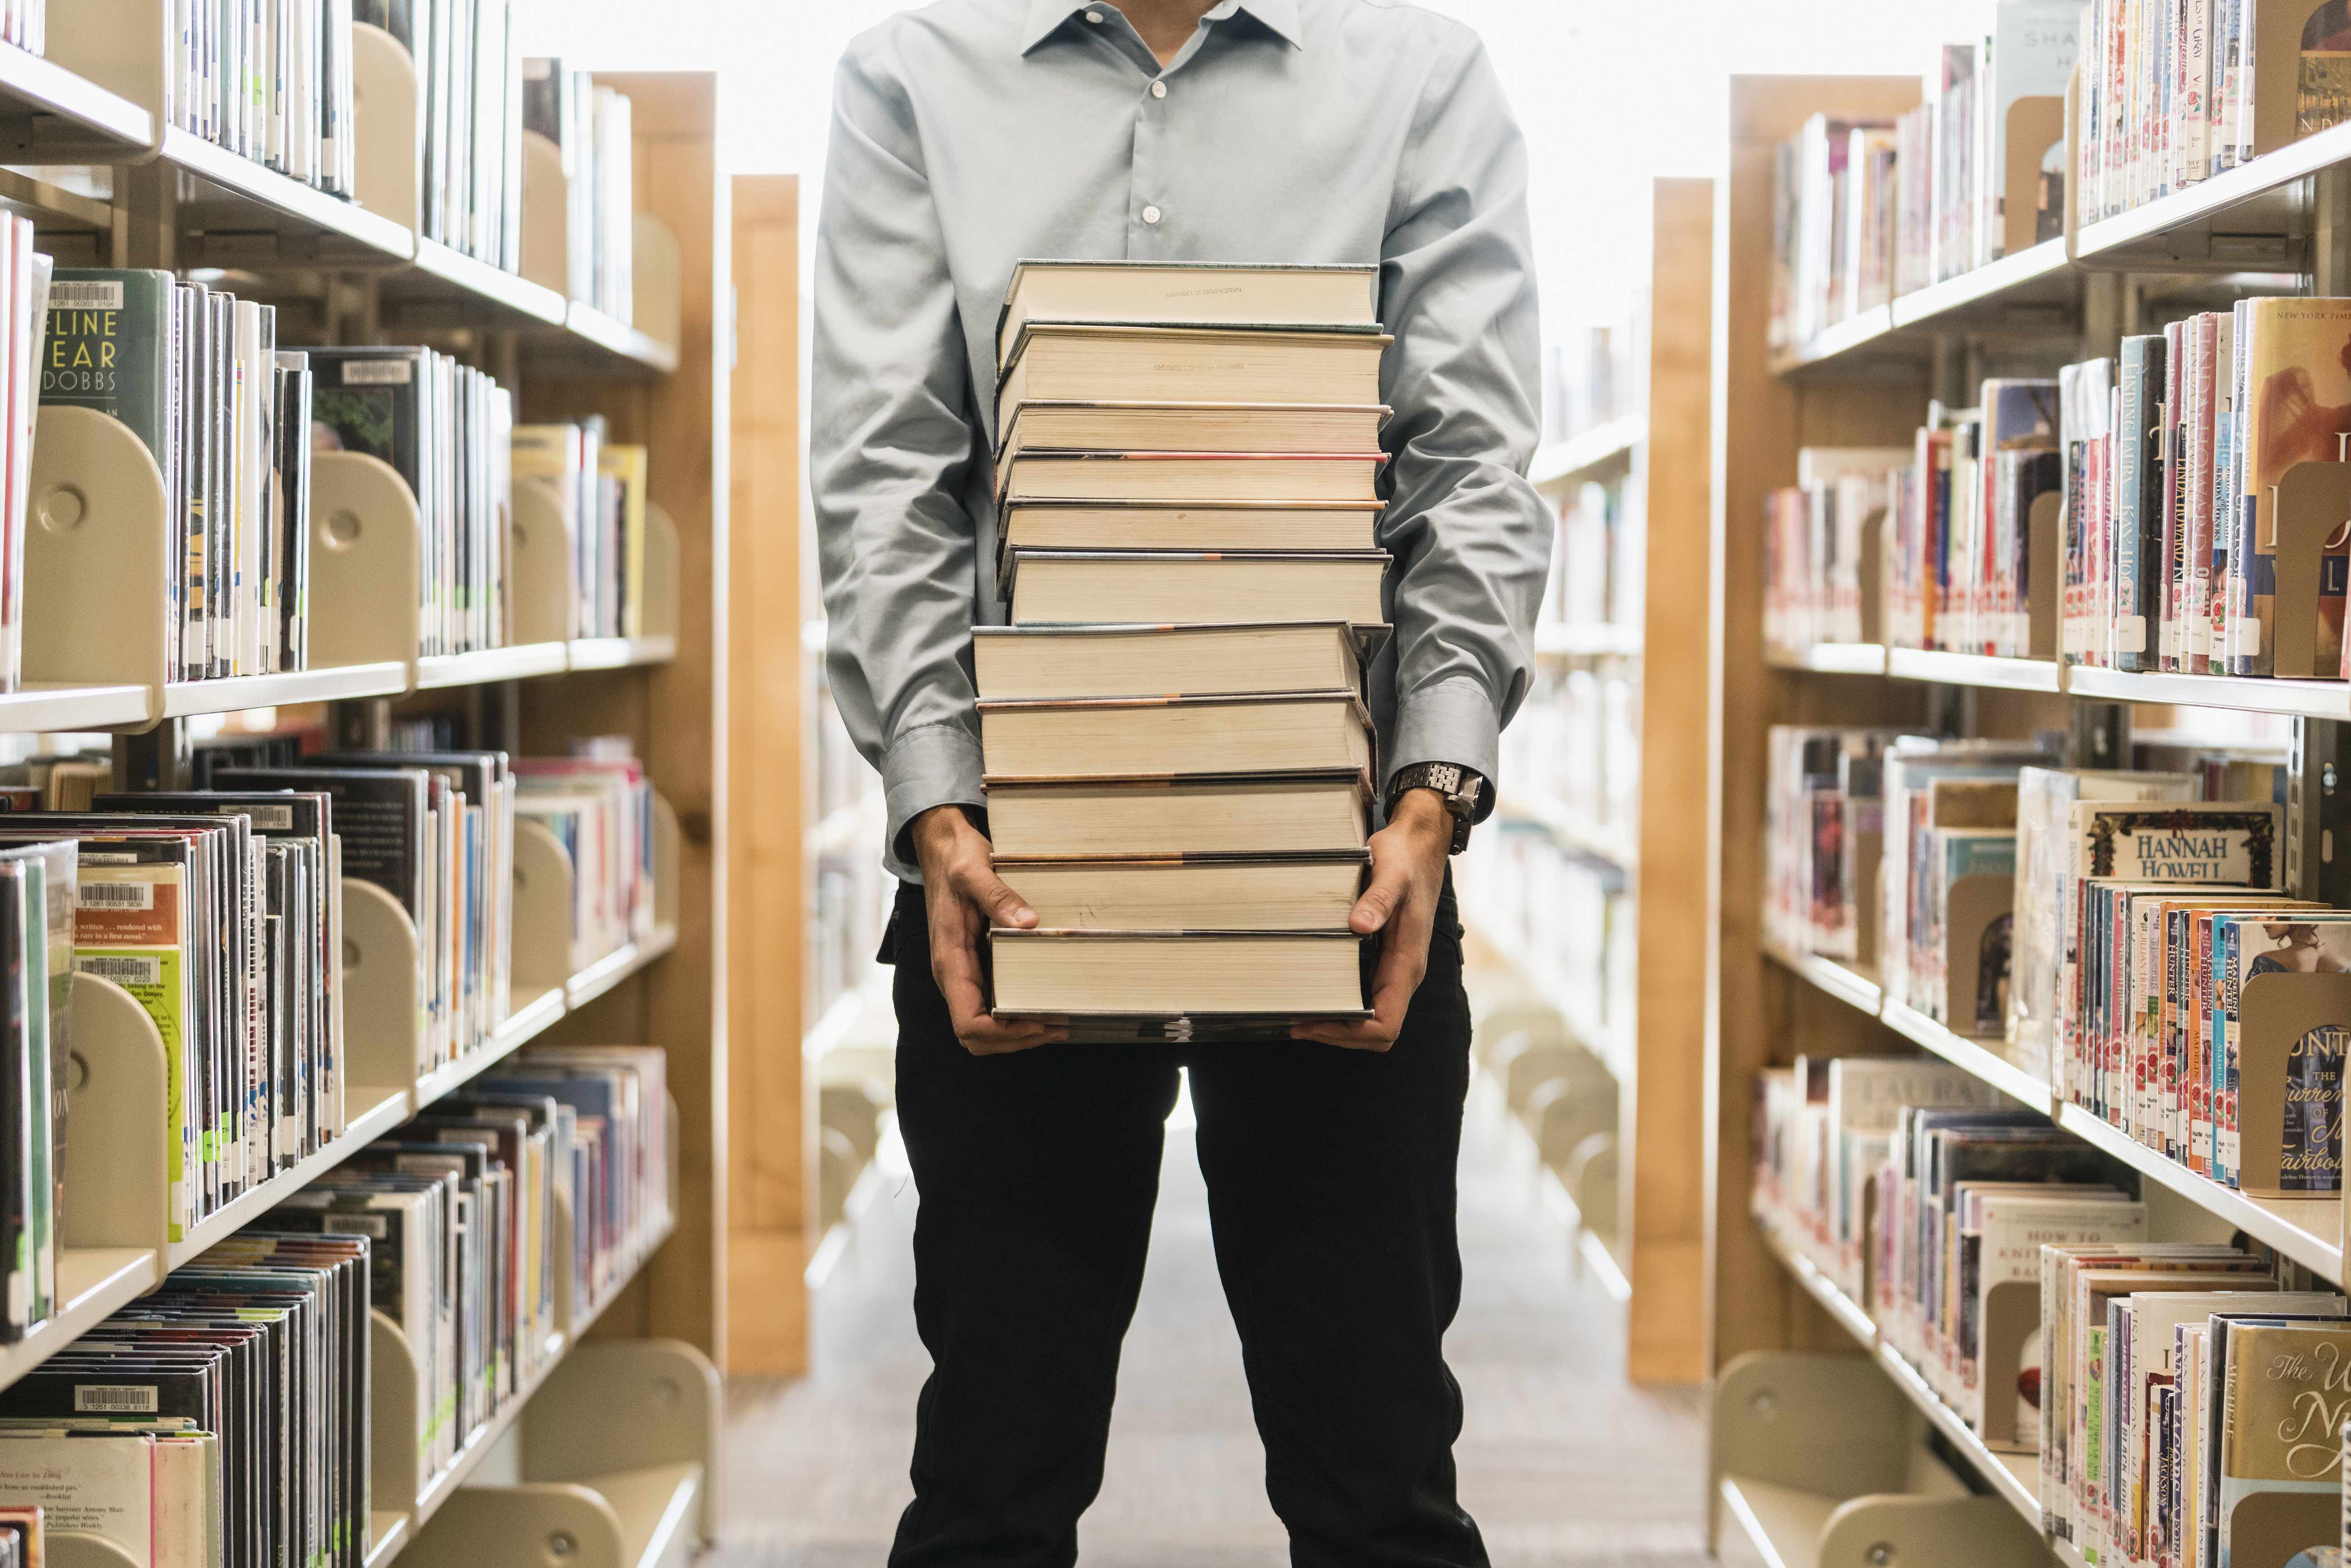 A man carries a stack of books in a library.